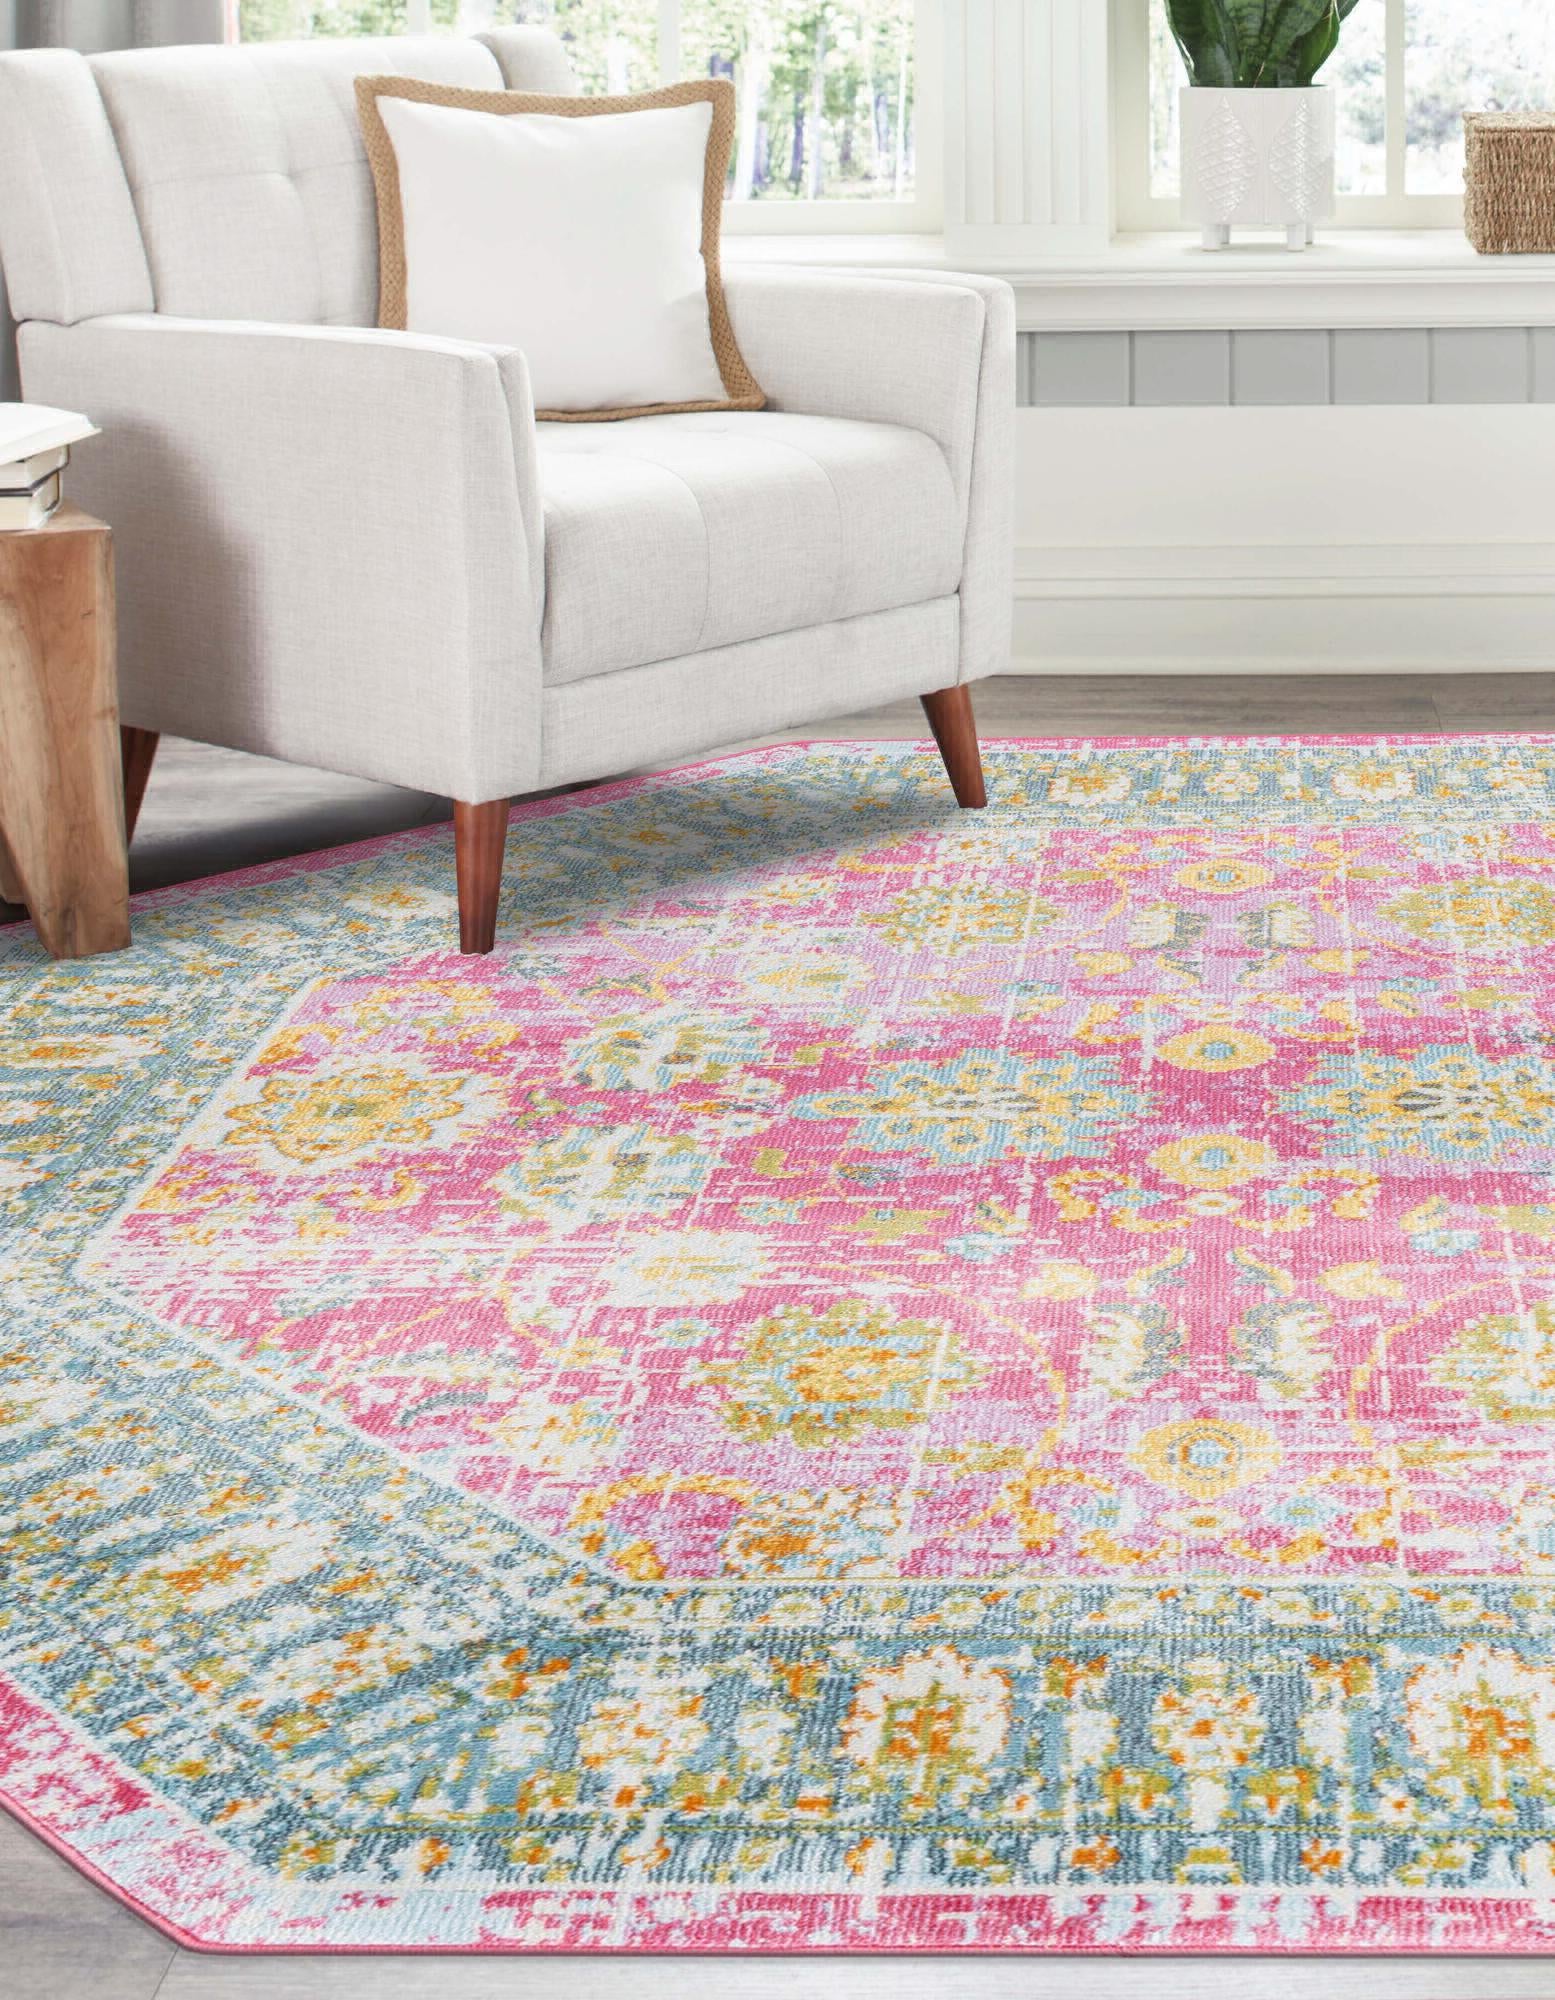 Unique Loom Paragon T Prgn4 Pink Area Rug Incredible Rugs And Decor